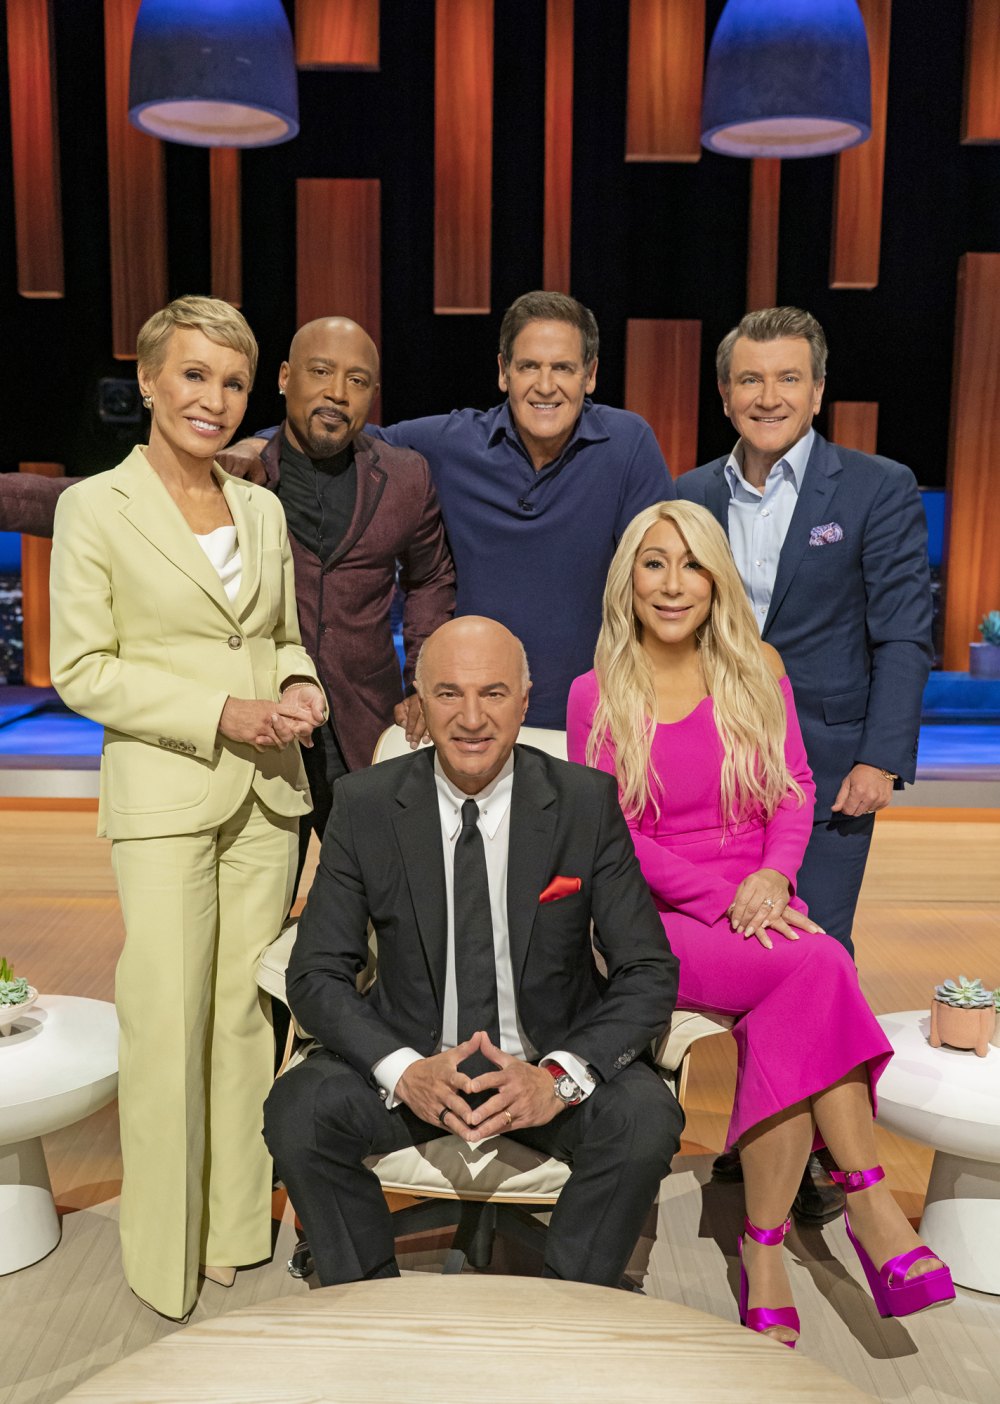 Kevin O'Leary Is 'Proud' That 'Shark Tank' Cast Him to Be an 'A-Hole